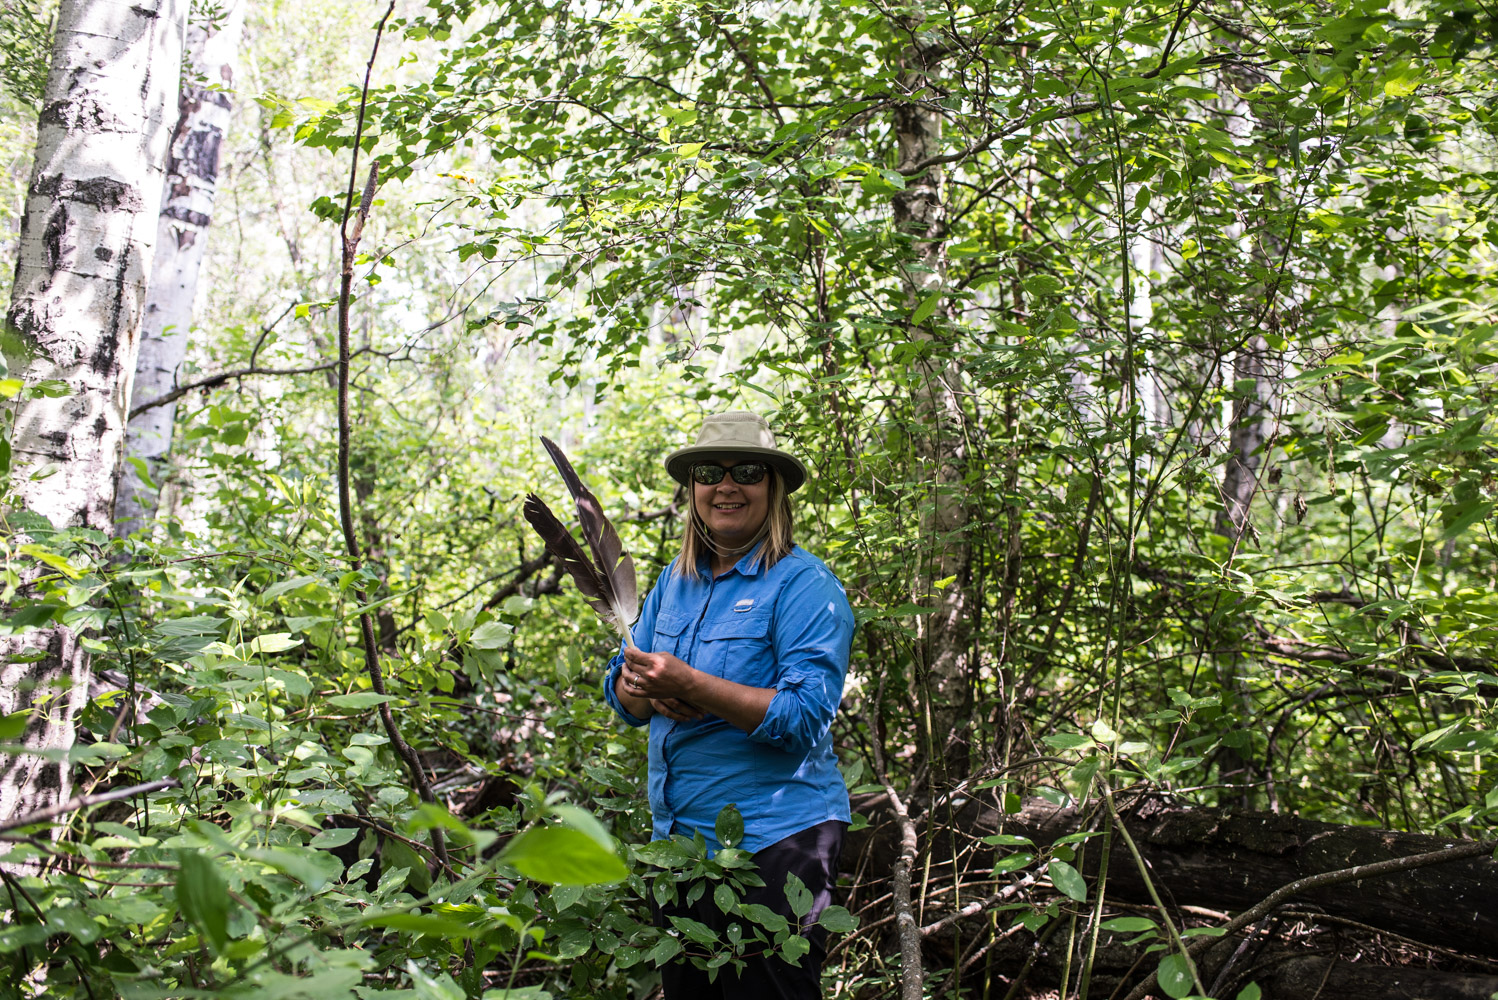  Carmen Wells collecting eagle feathers, July 2017. 